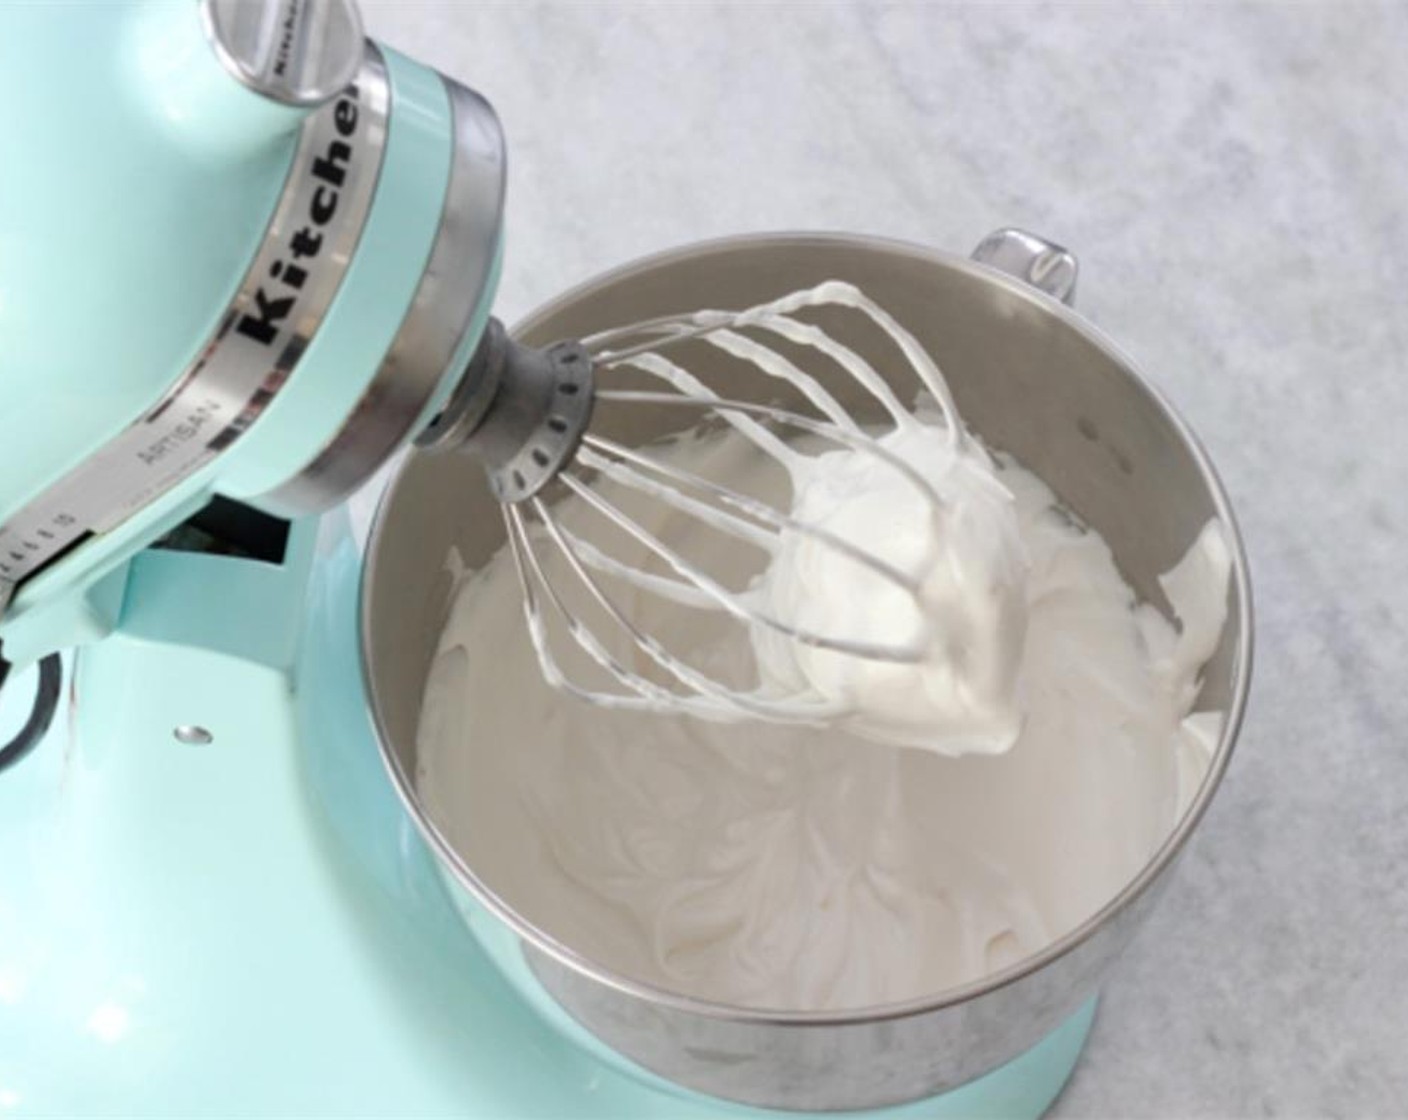 step 18 In the large bowl of a standing mixer, using a whisk attachment, whisk the whites of the Eggs (7) until frothy. Gradually pour in the remaining Granulated Sugar (1/2 cup) then add the juice from Lemon (1) and Vanilla Extract (1 tsp).